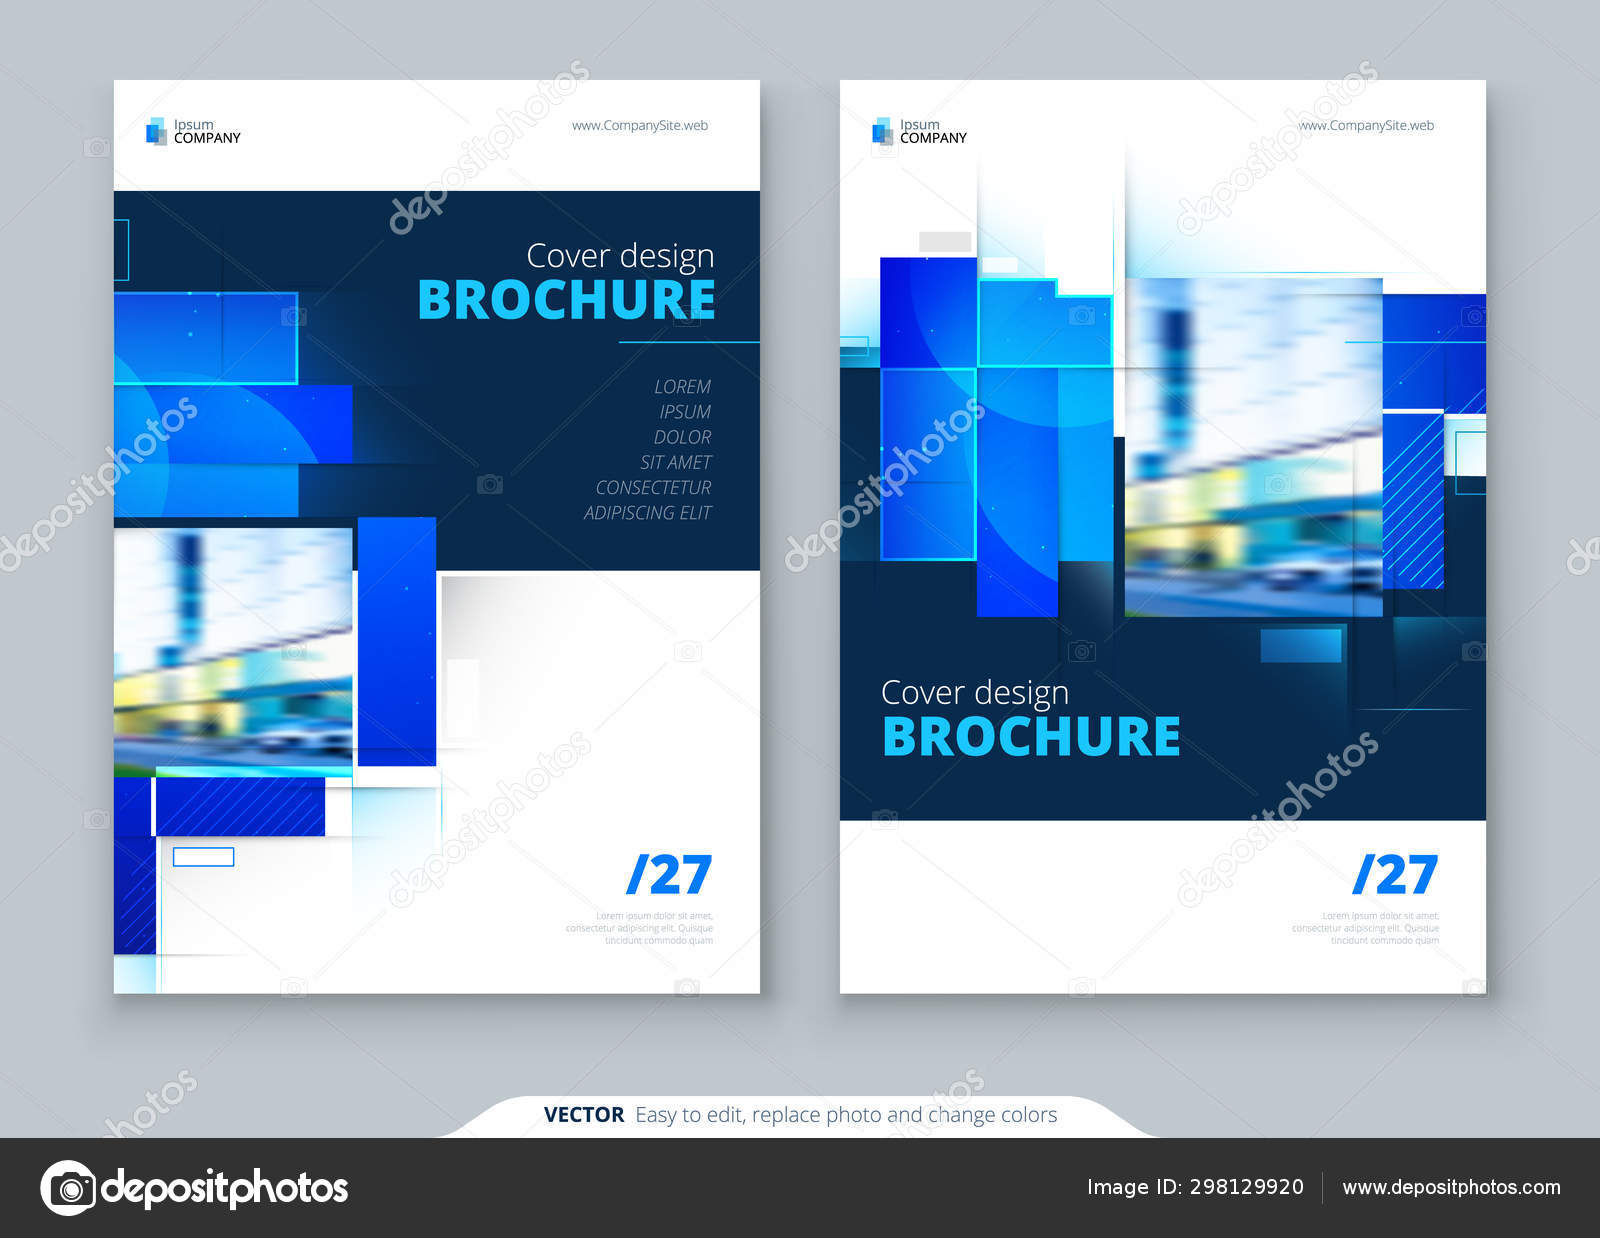 Download Blue Brochure Cover Template Layout Design Corporate Business Annual Report Catalog Magazine Flyer Mockup Creative Modern Bright Concept With Square Shapes Vector Image By C Greatbergens Vector Stock 298129920